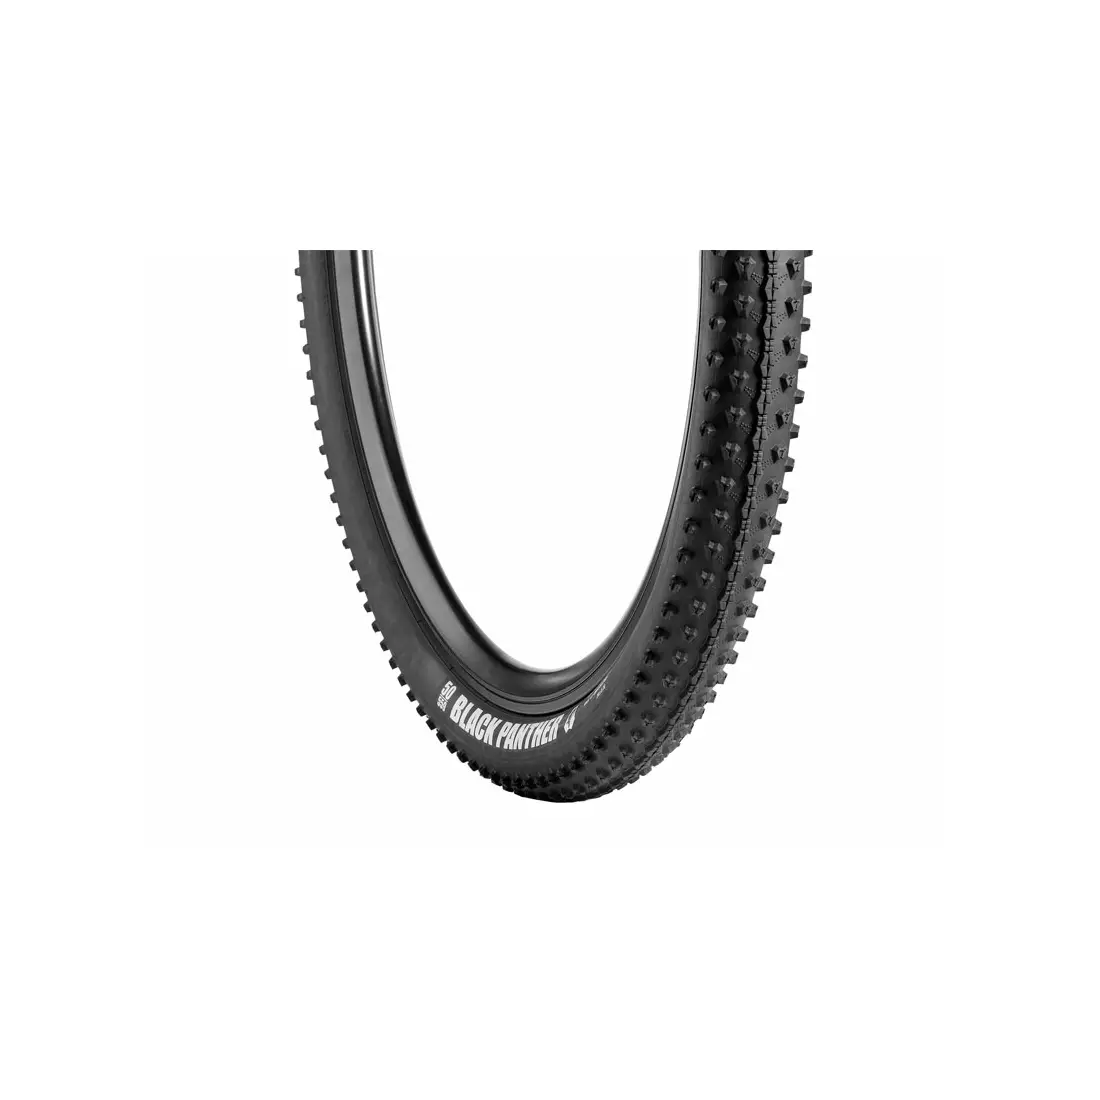 VREDESTEIN BLACK PANTHER SUPERLITE Mtb bicycle tyre 29x2.20 (55-622) TPI120 530g black coiled VRD-29221